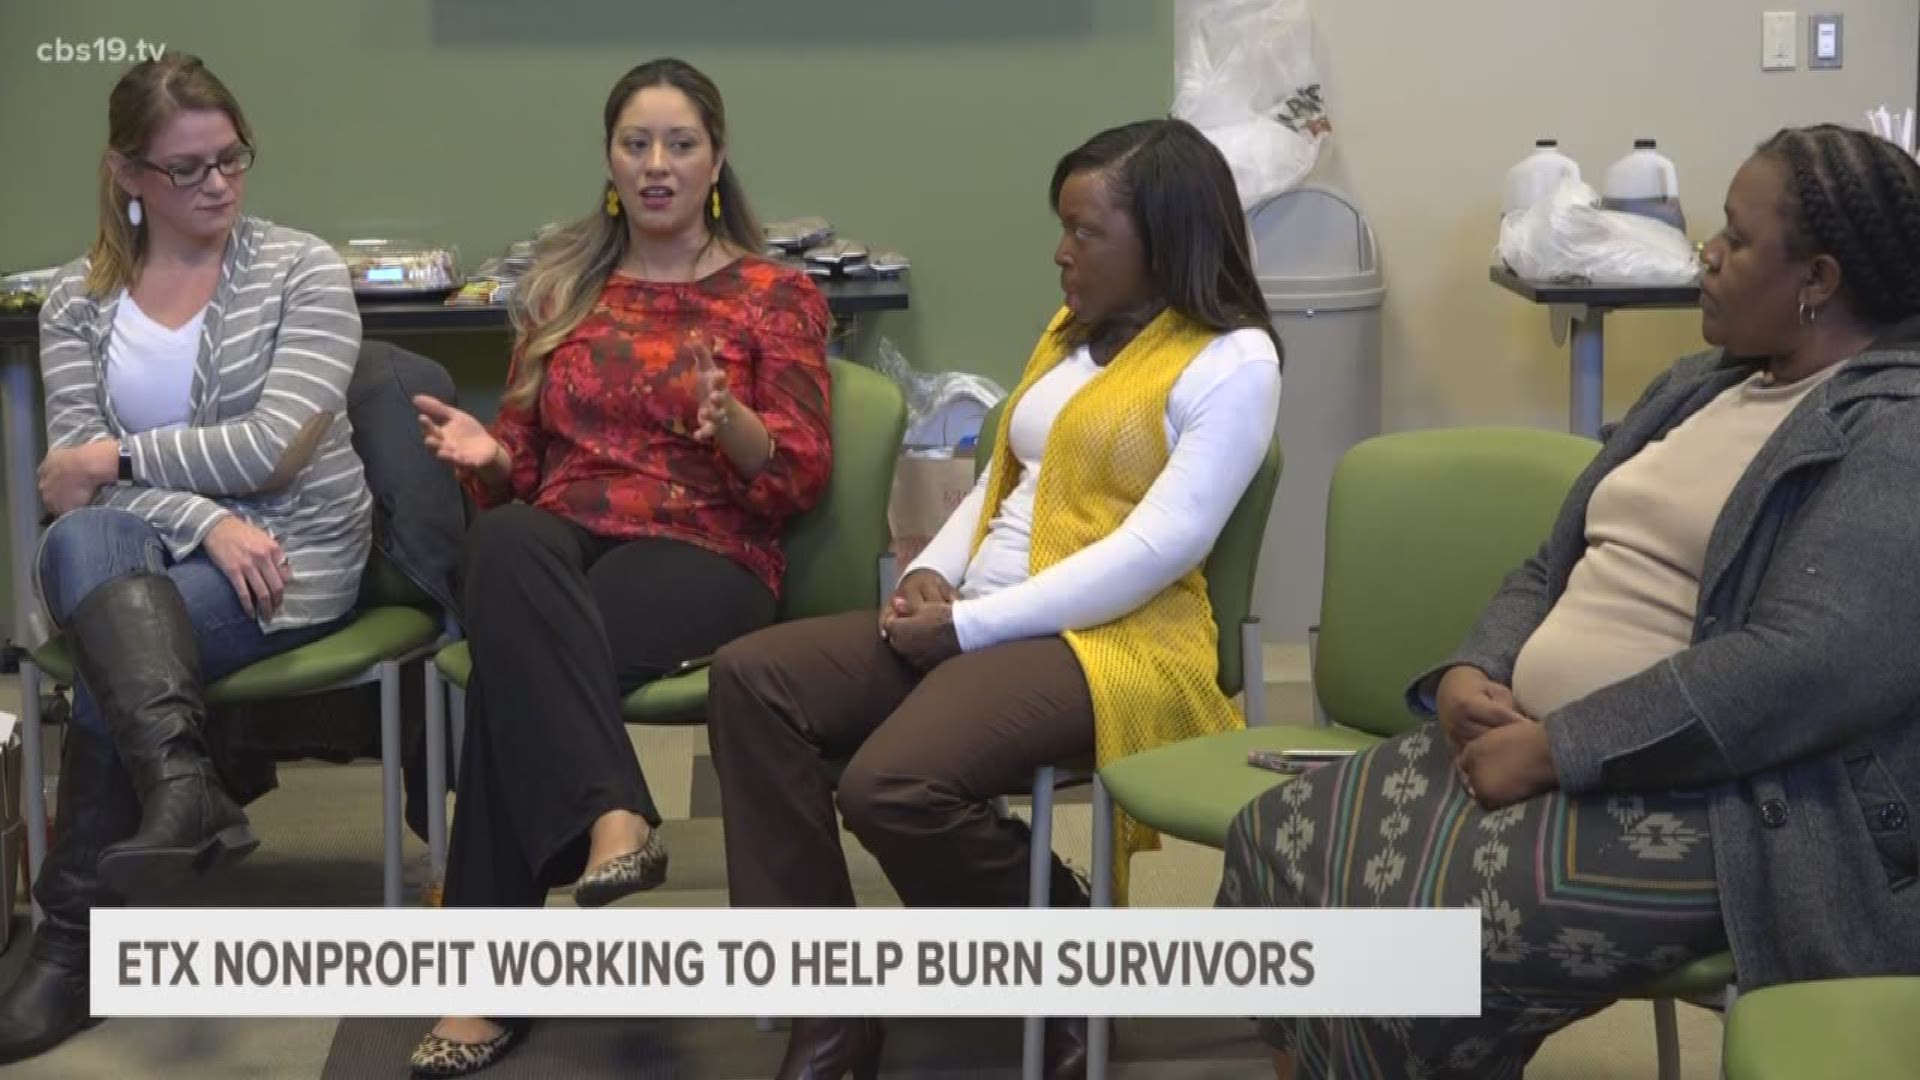 Recovery can be a long and challenging process. But, it does not have to happen alone. The East Texas Burn Foundation is offering burn survivors and caregivers a way to share their experiences.